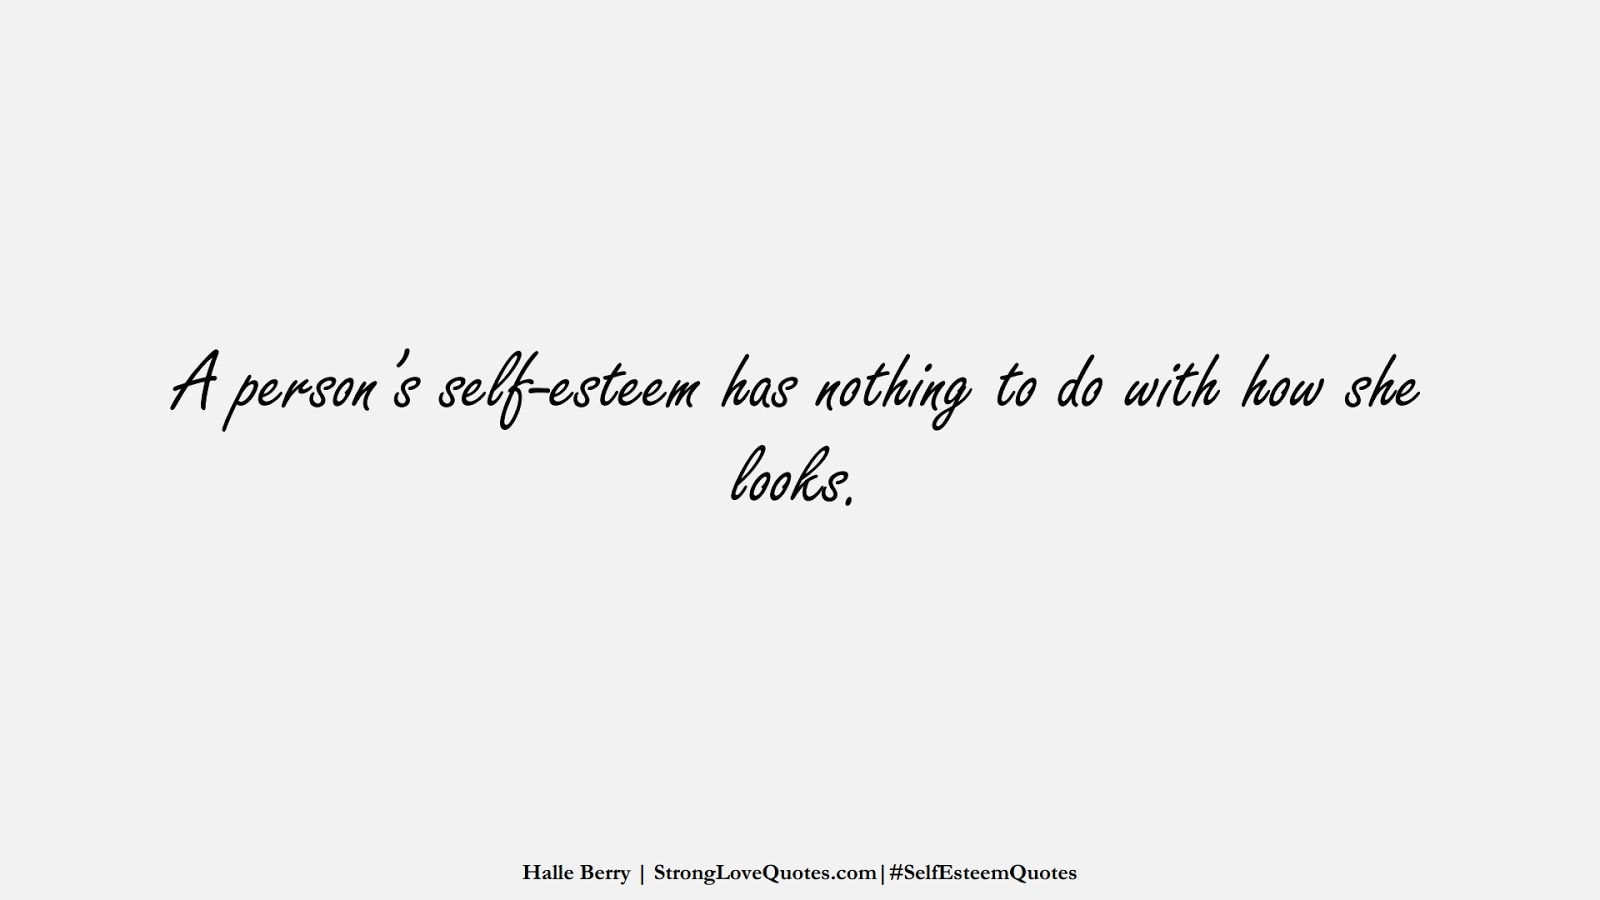 A person’s self-esteem has nothing to do with how she looks. (Halle Berry);  #SelfEsteemQuotes